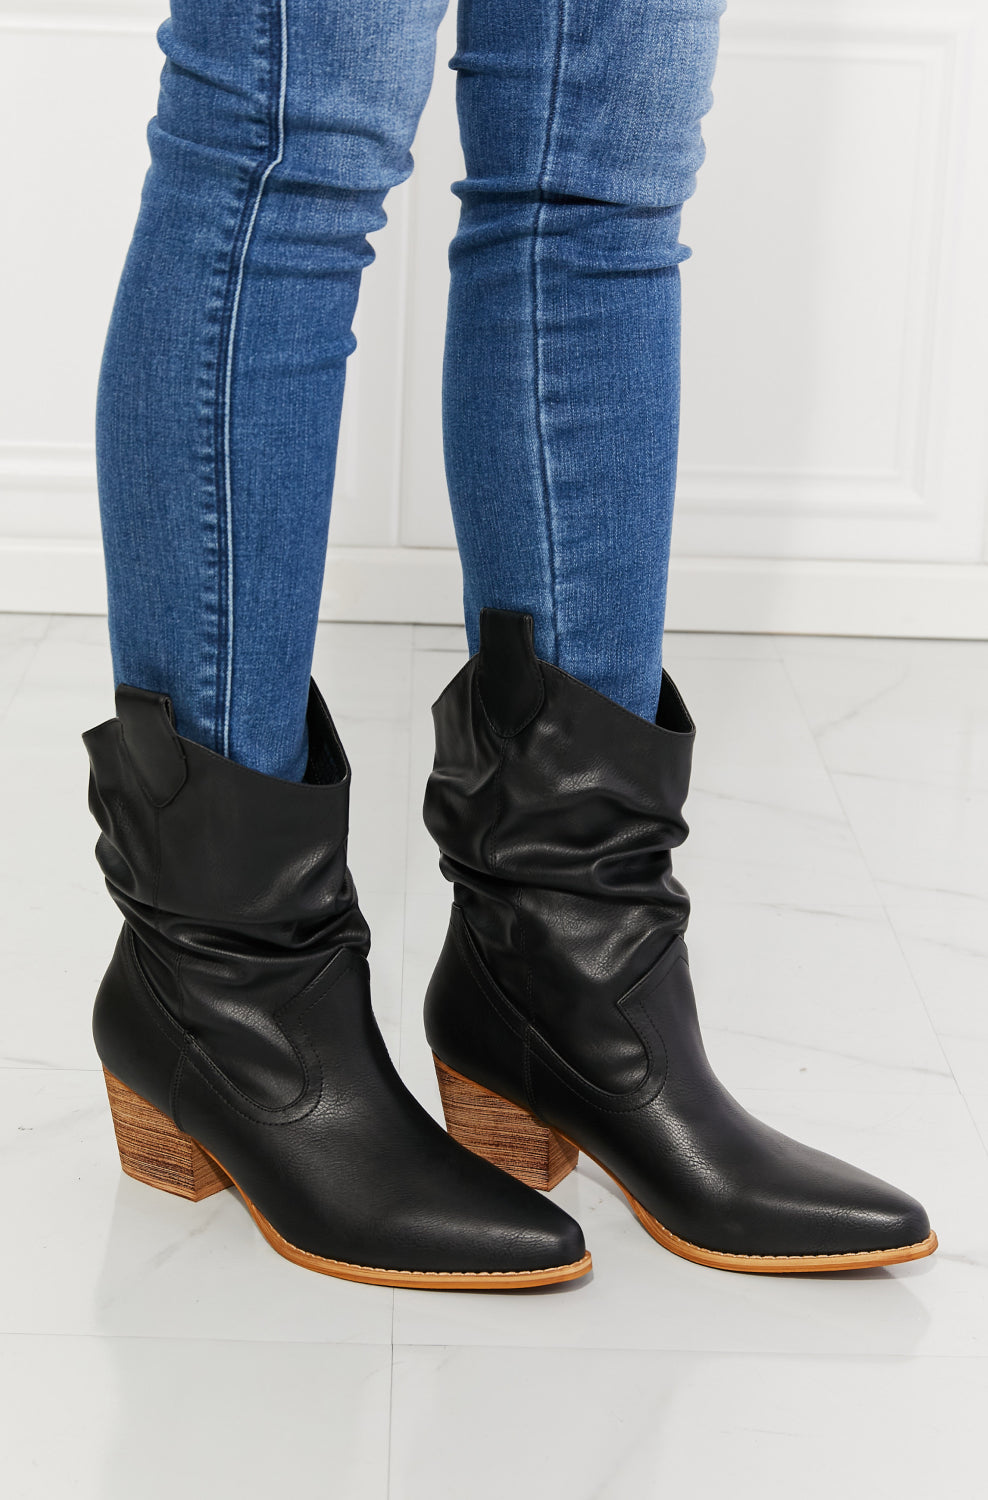 MMShoes Better in Texas Scrunch Cowboy Boots in Black MMShoes